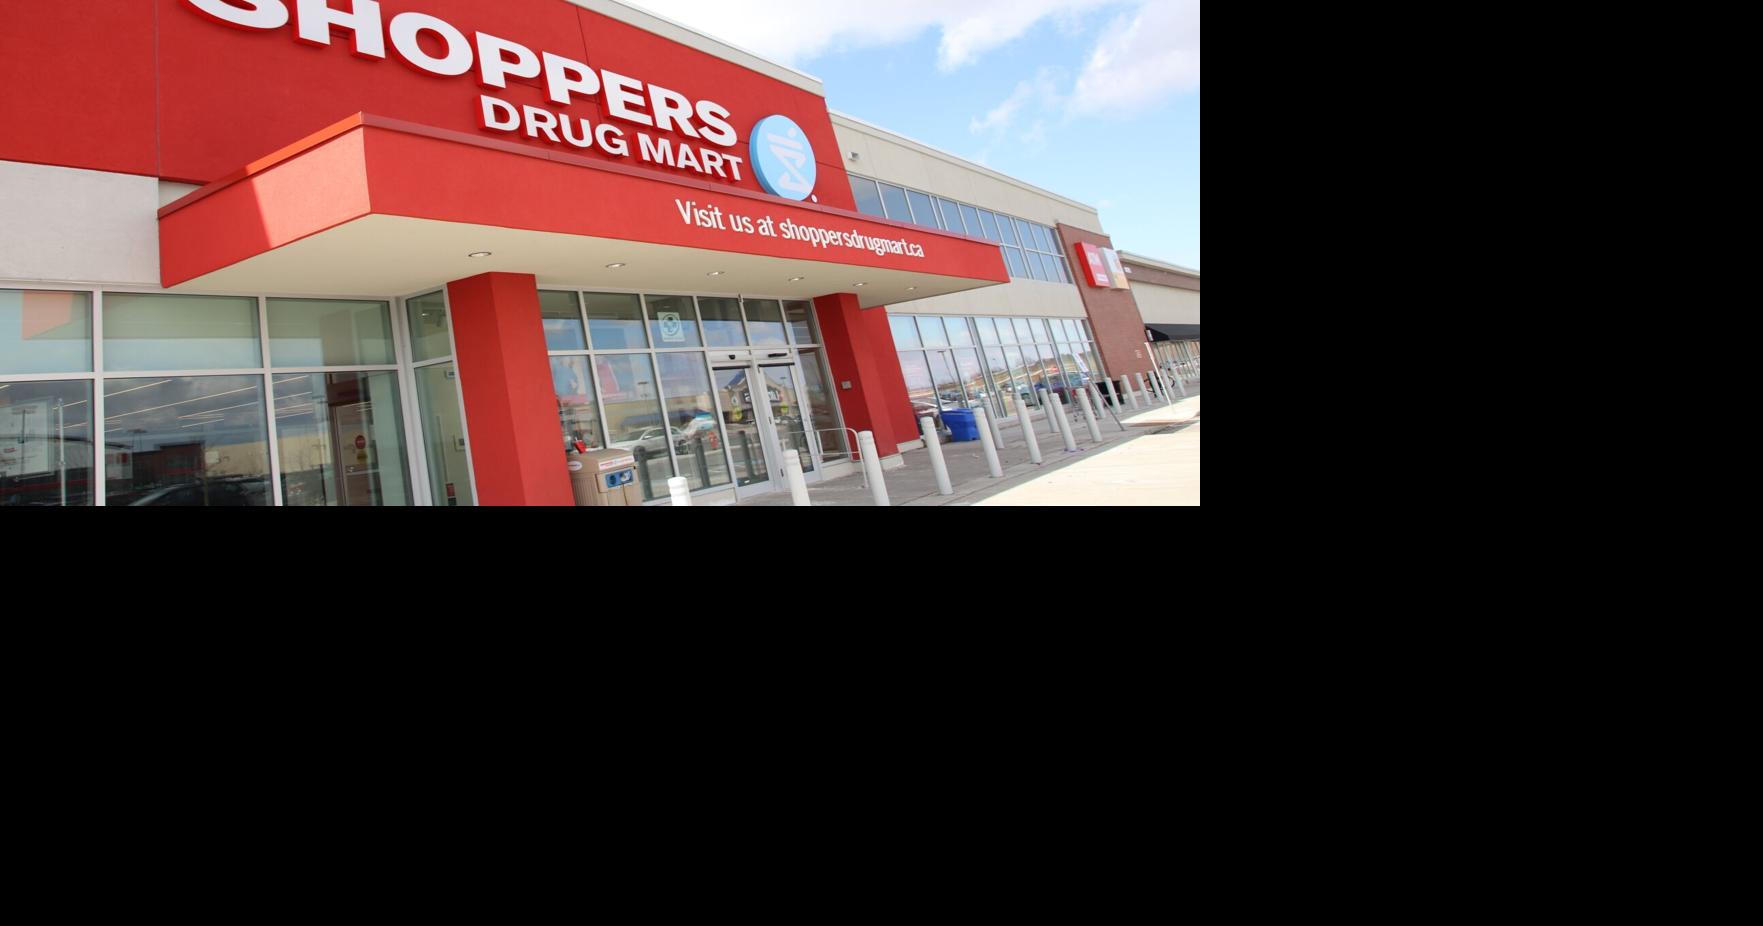 UPDATE: Huron Street Shoppers Drug Mart pharmacy open and